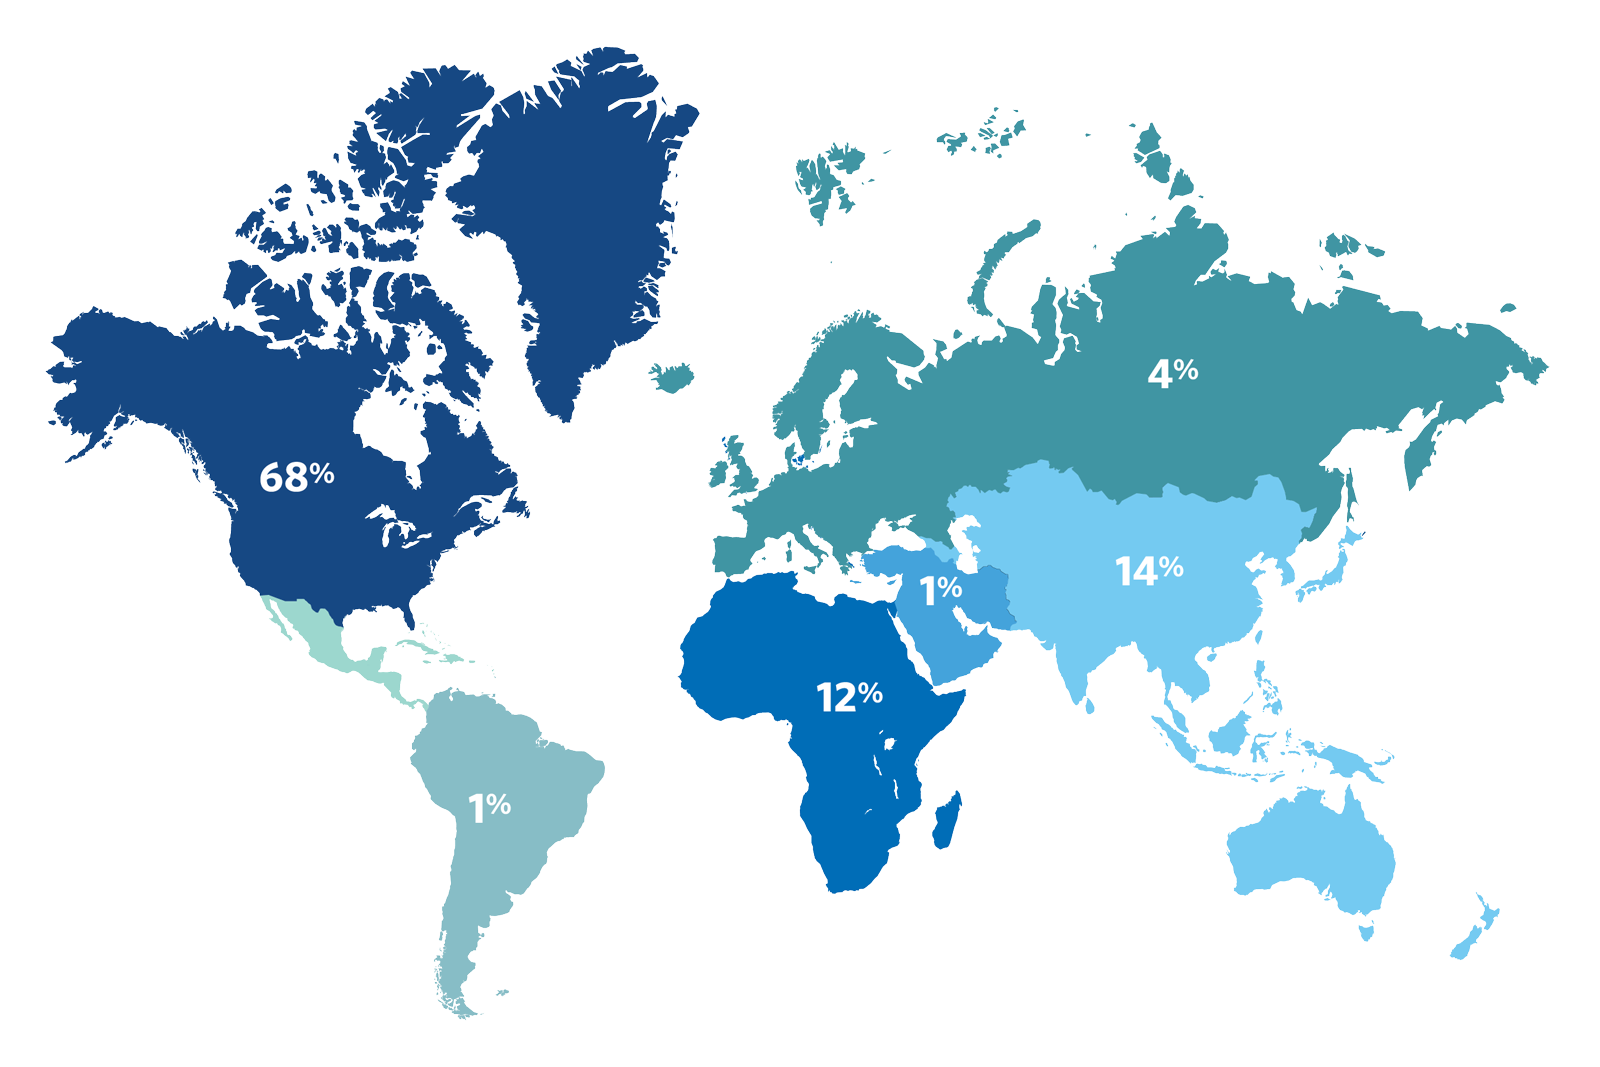 The Leadership Journey participants by region